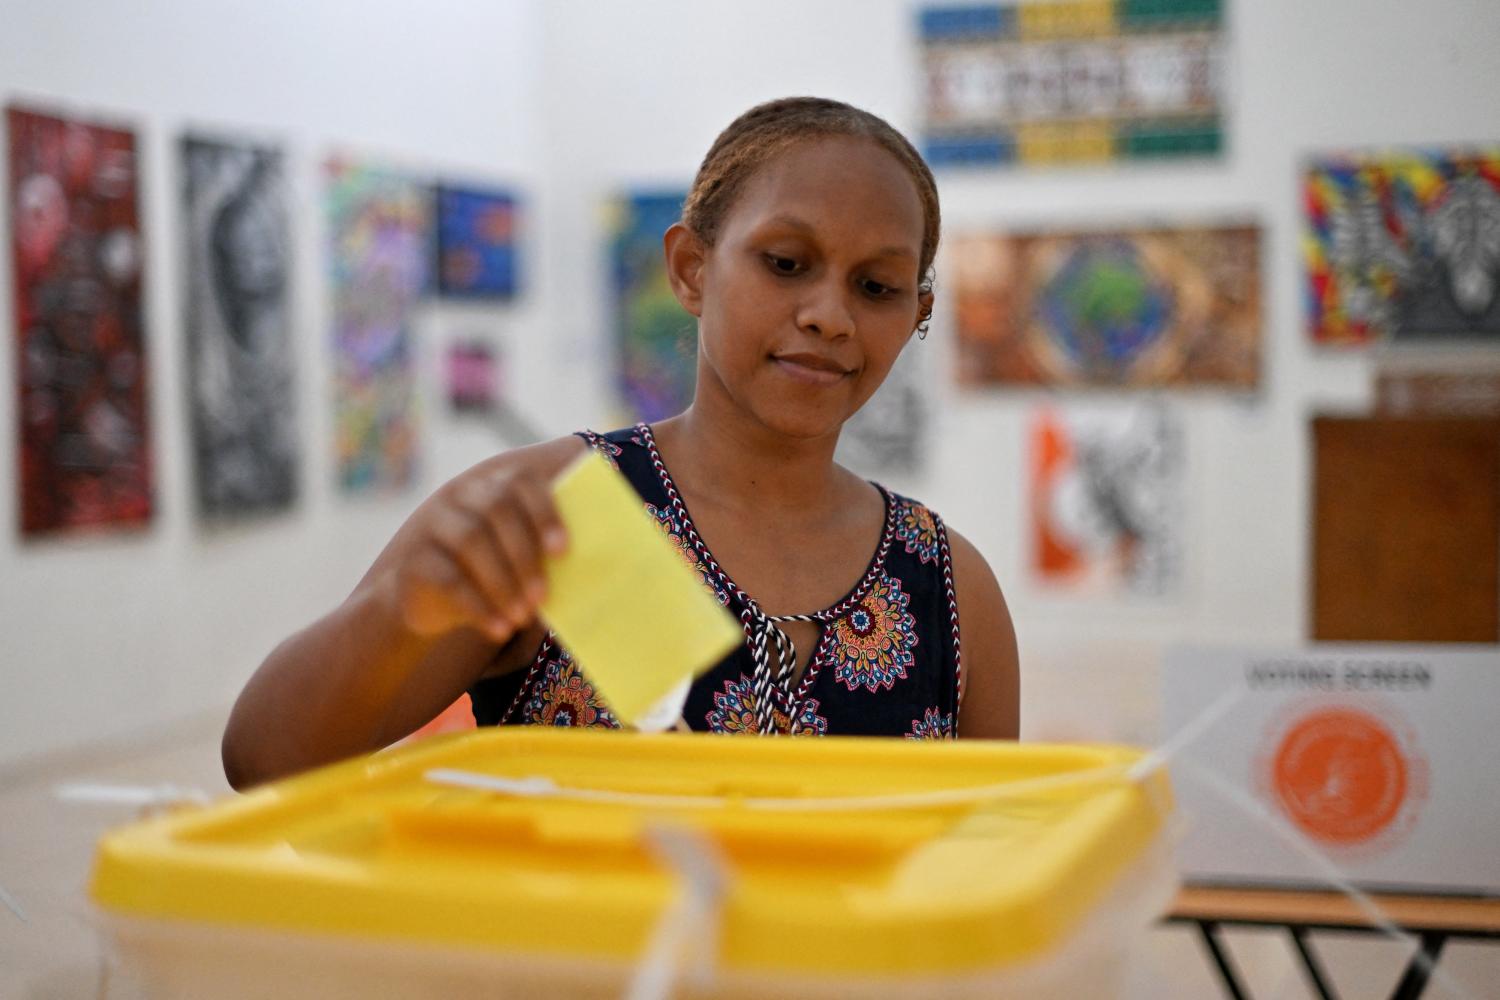 A woman casts her vote during the general elections in Honiara on 17 April. (Saeed KHAN/Getty) 